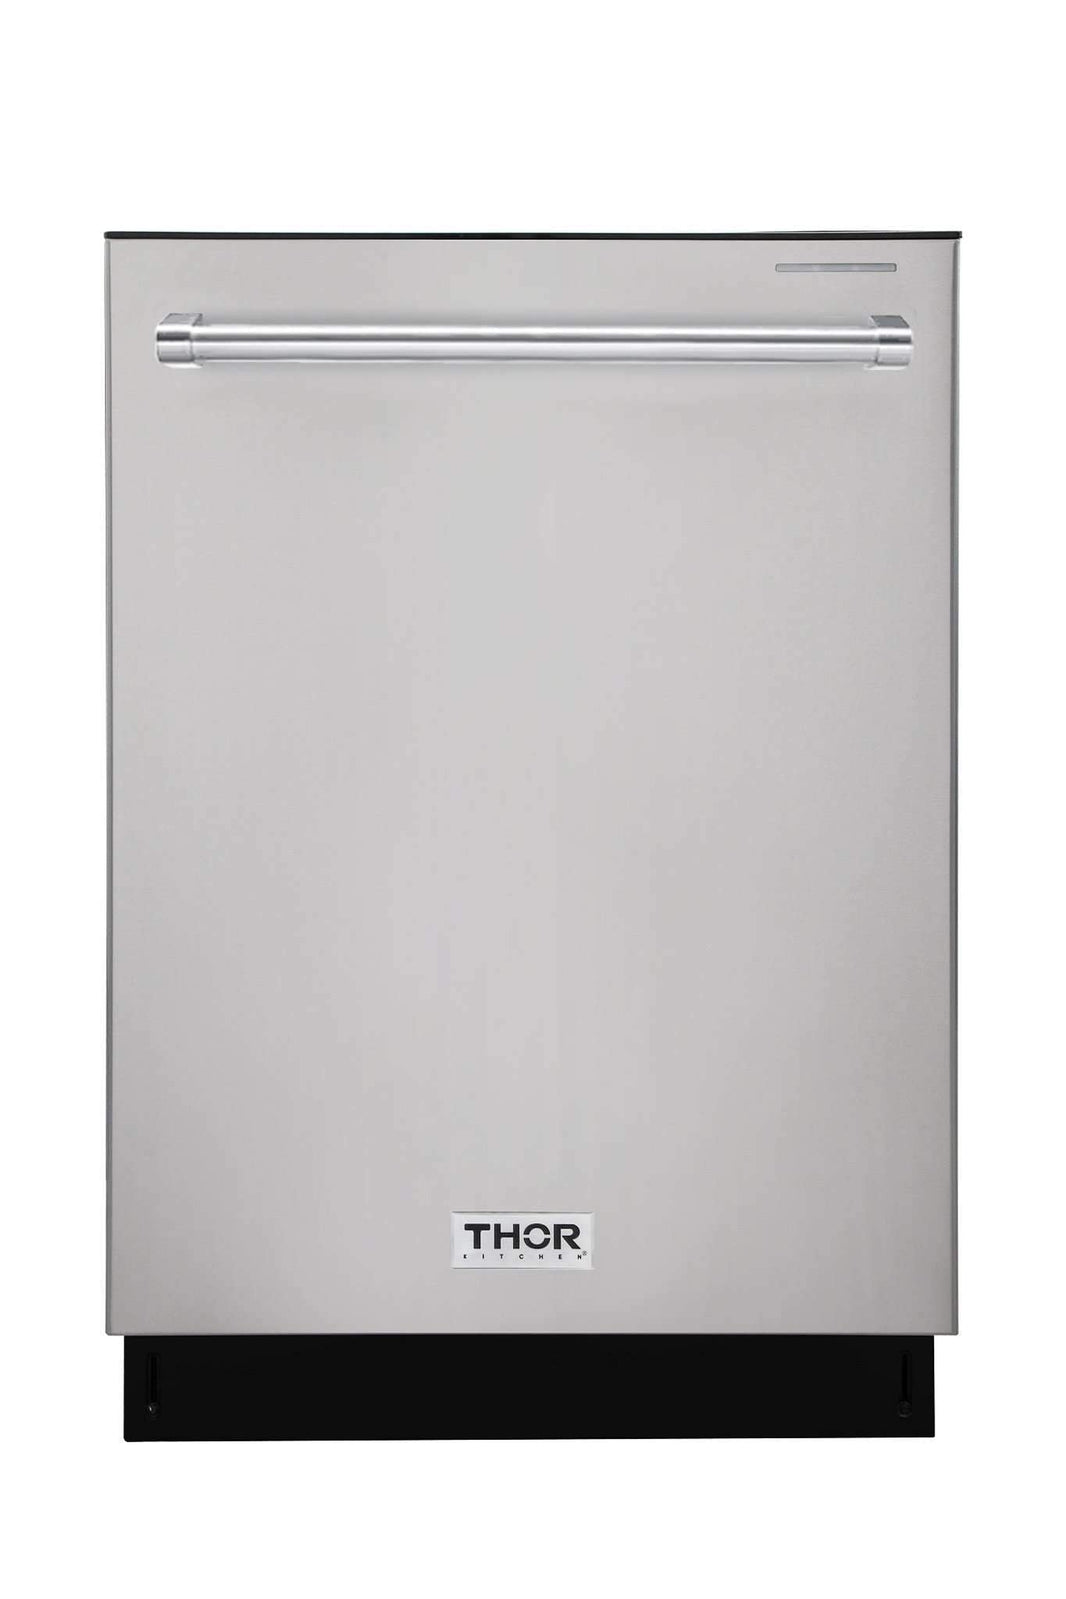 Thor Kitchen 6-Piece Pro Appliance Package - 36-Inch Rangetop, Electric Wall Oven, Pro-Style Wall Mount Hood, Refrigerator with Water Dispenser, Dishwasher, & Microwave in Stainless Steel